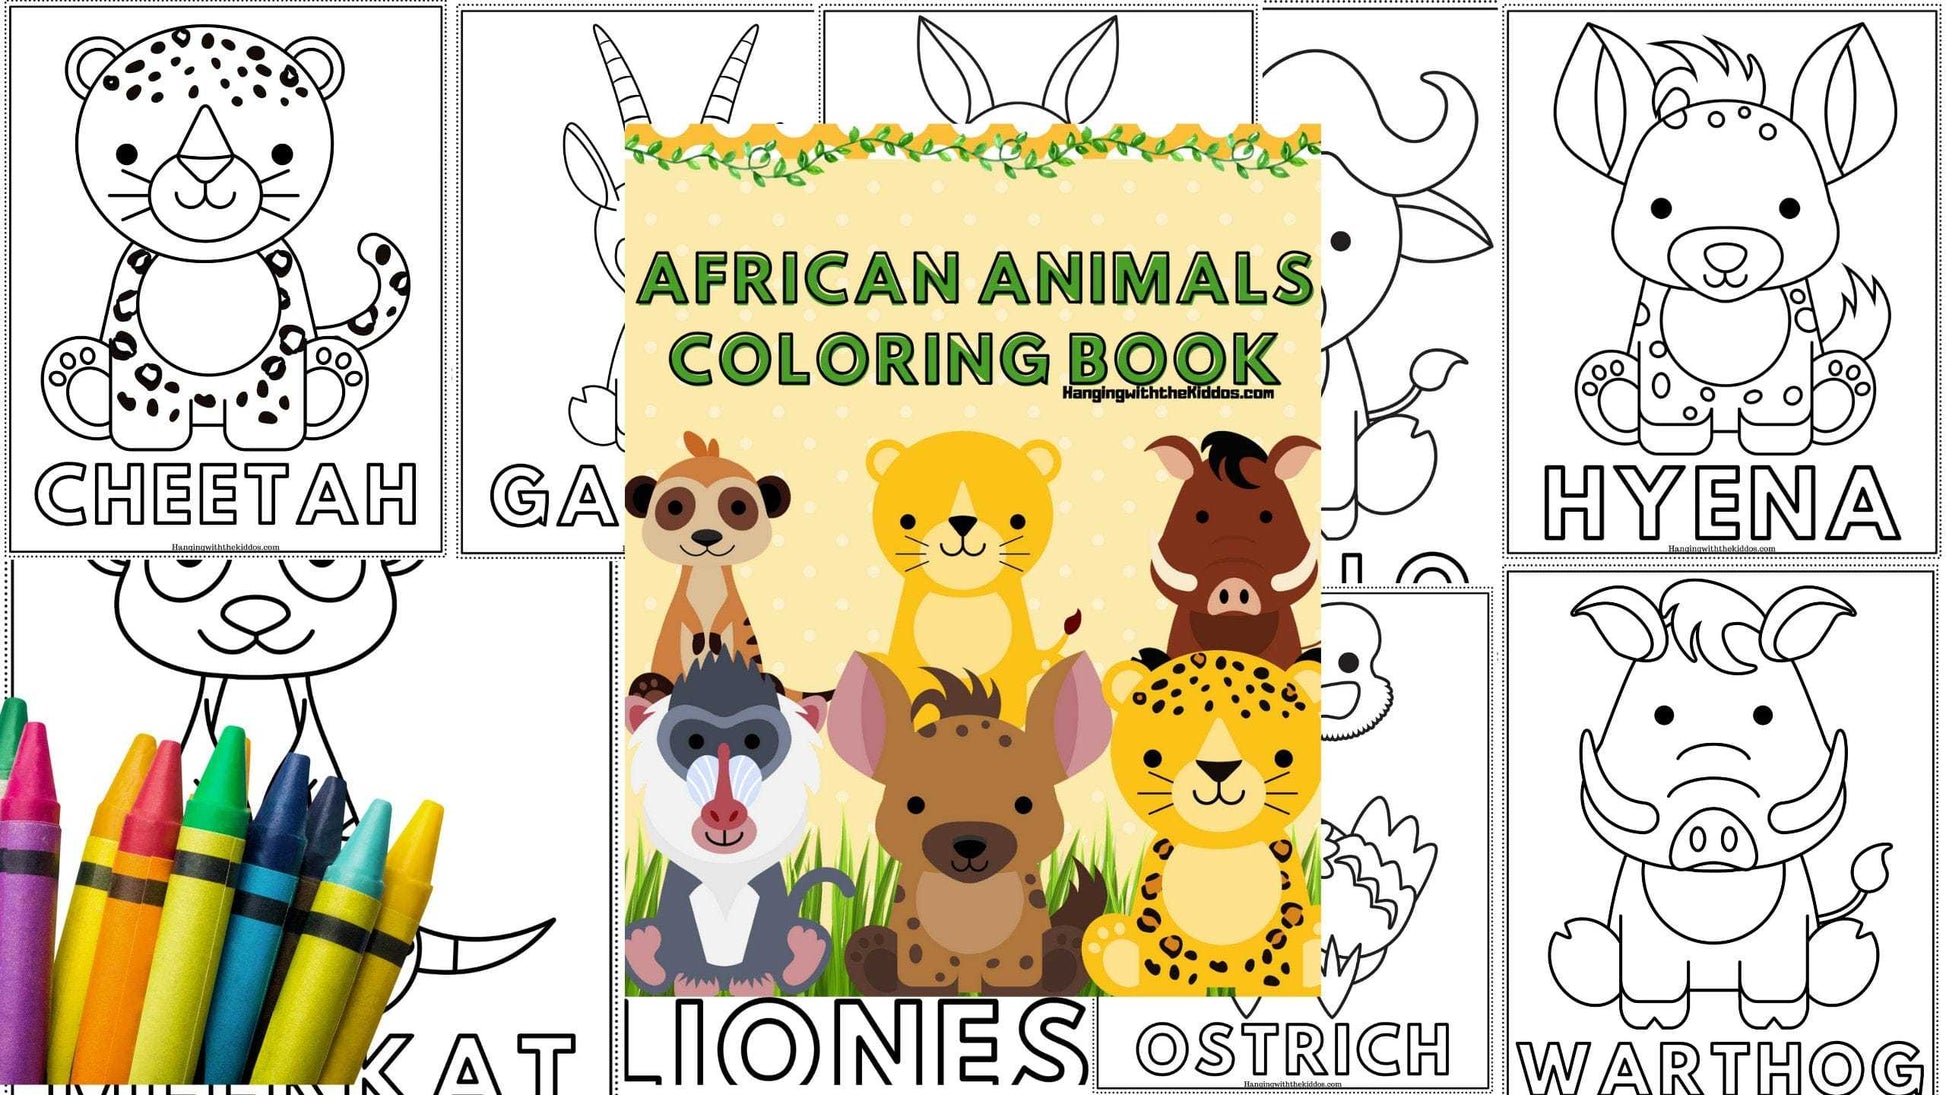 African Animals Coloring Book | Printable colouring book for Kids and Adults| Zoo Animal